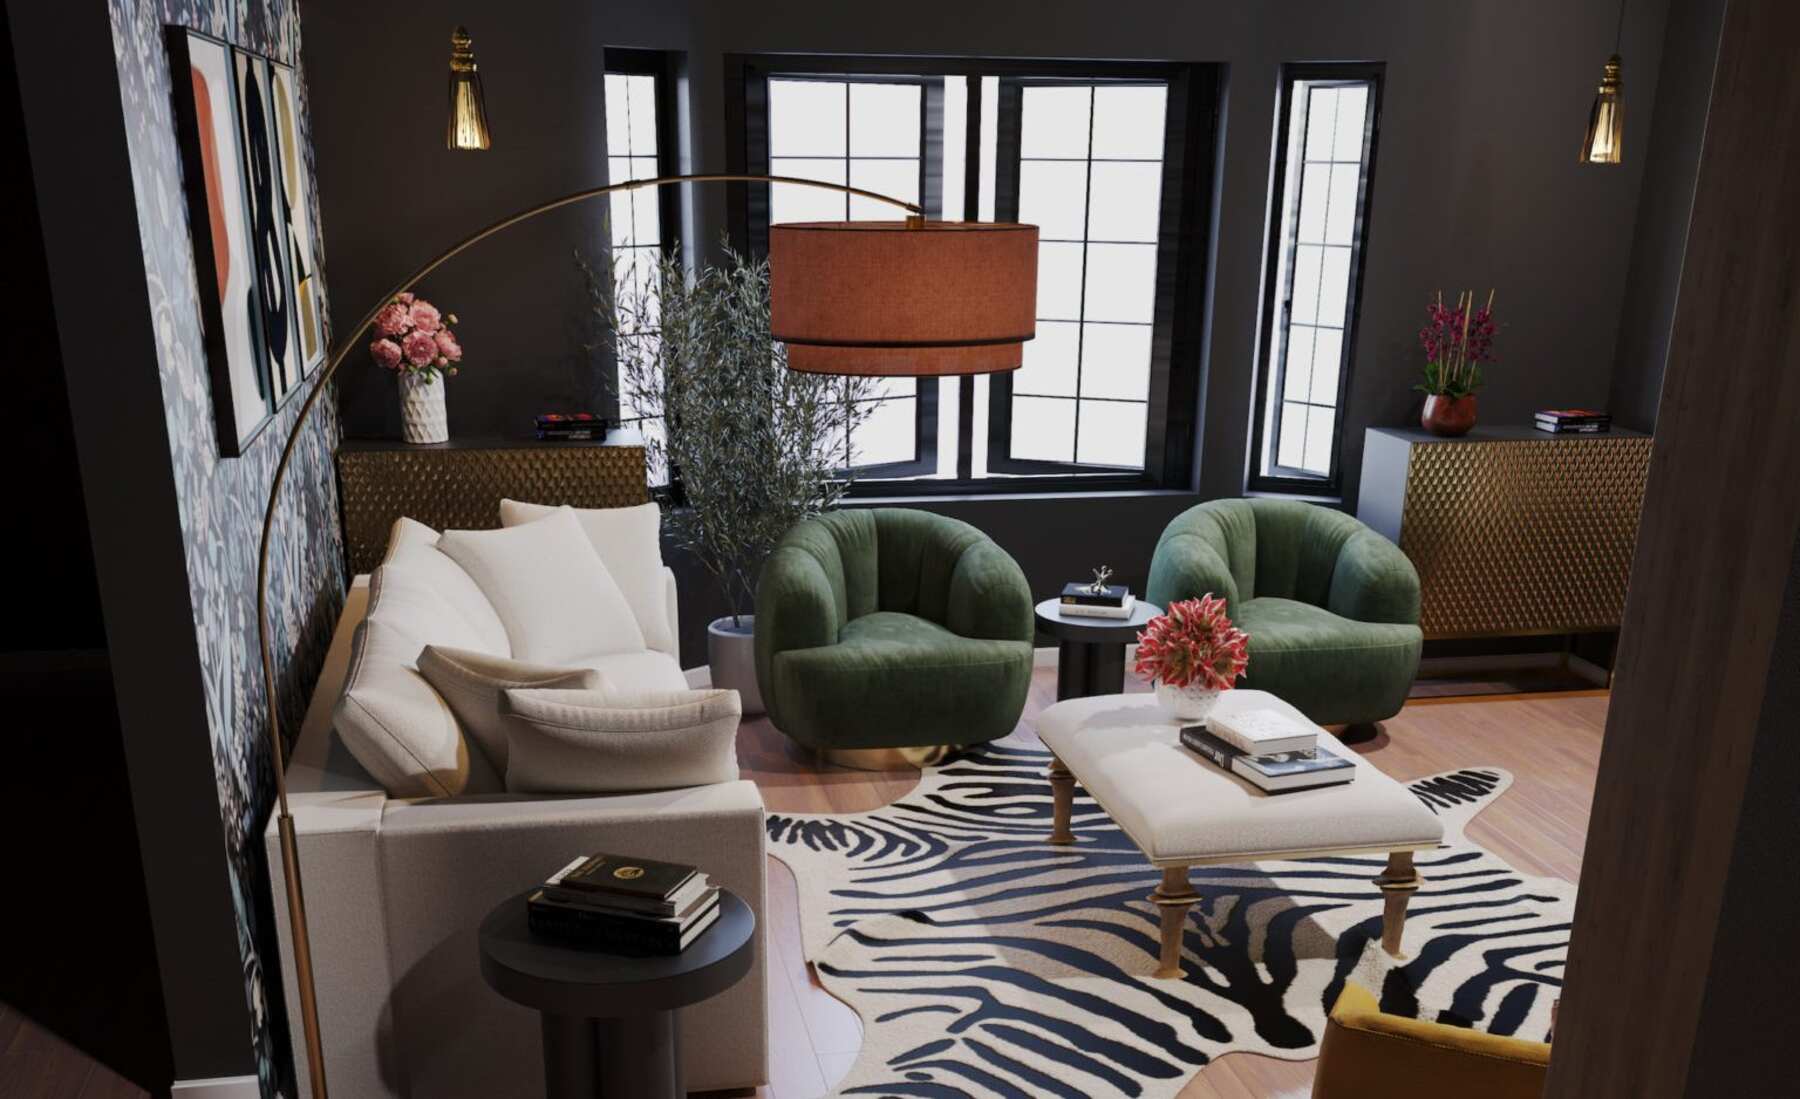 Living room with green armchairs, white sofa and a zebra print rug